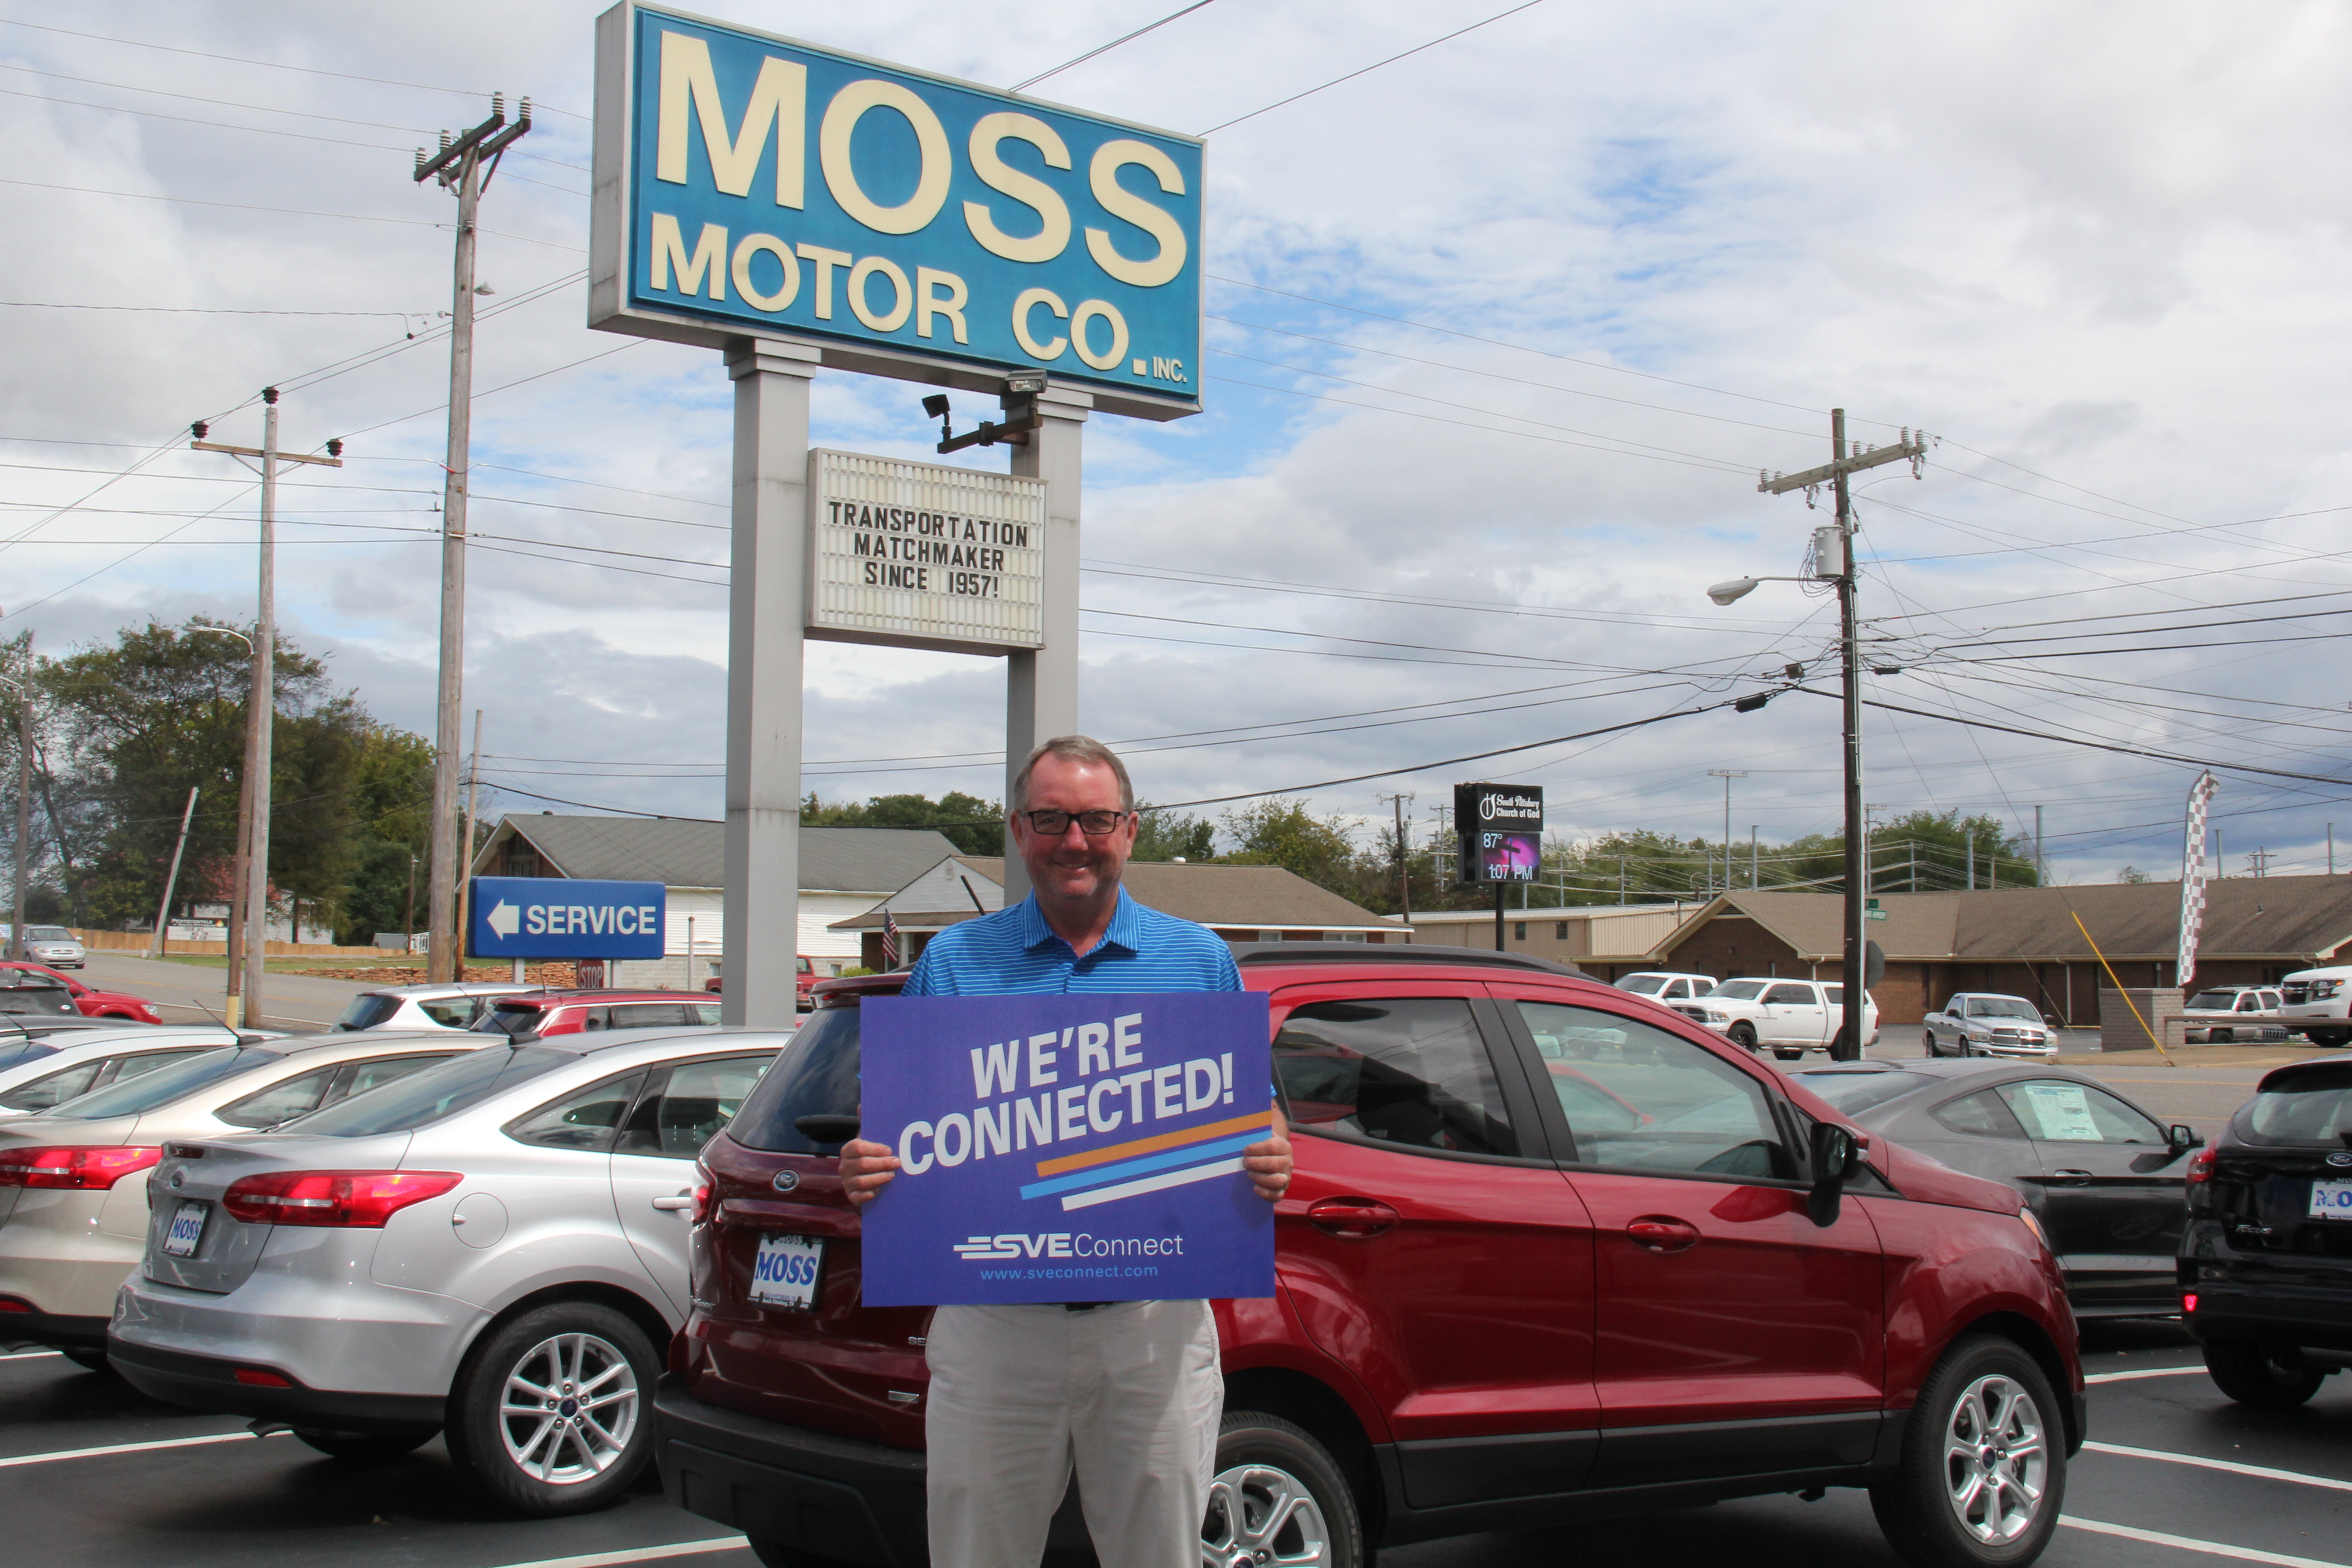 Steve Moss with Moss Motor in South Pittsburg is Connected